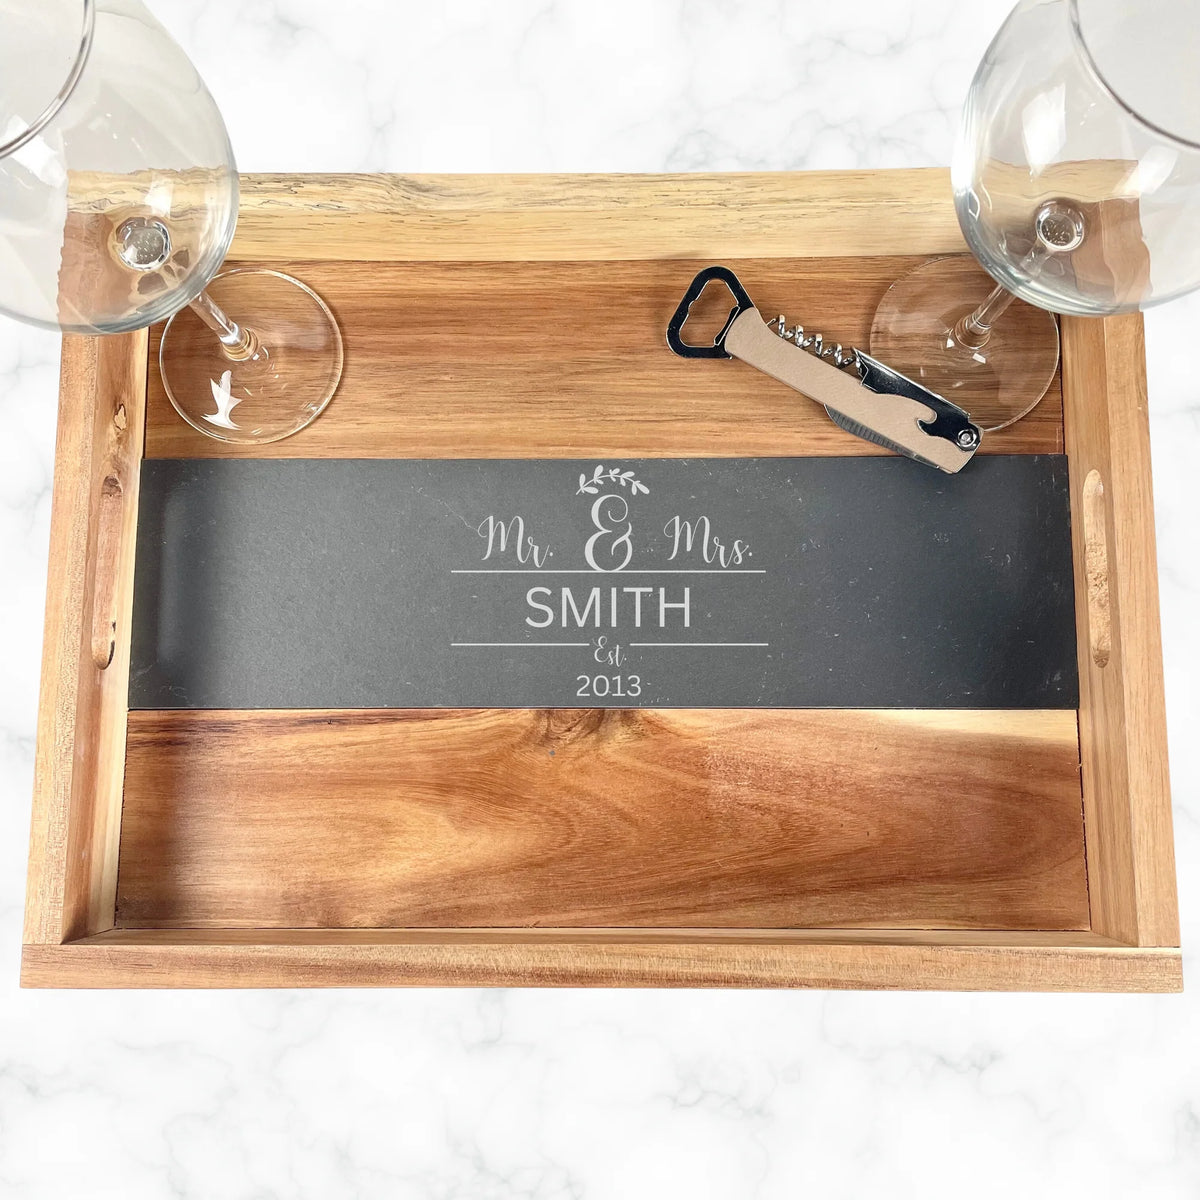 Mr. and Mrs. Keepsake Serving Tray